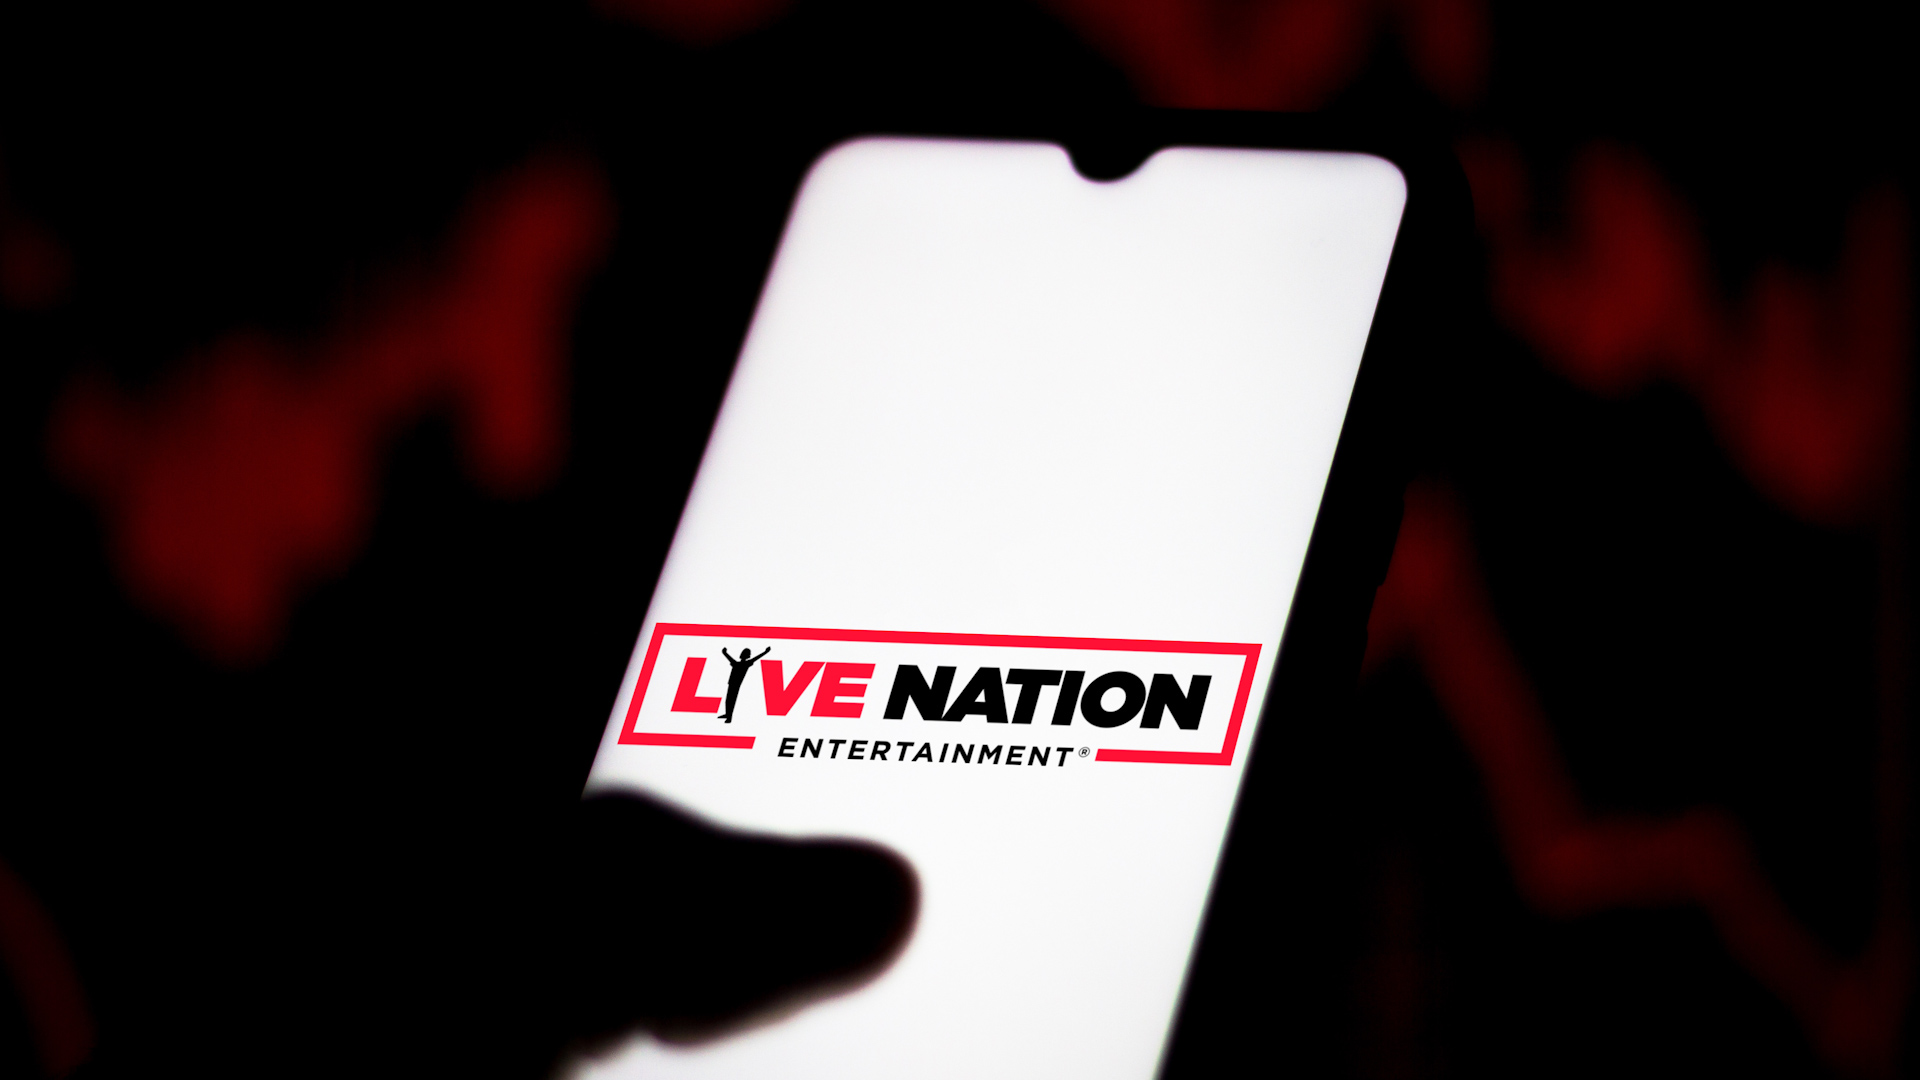 The Justice Department plans to file an antitrust lawsuit against Live Nation, the owner of Ticketmaster, after a Taylor Swift debacle.